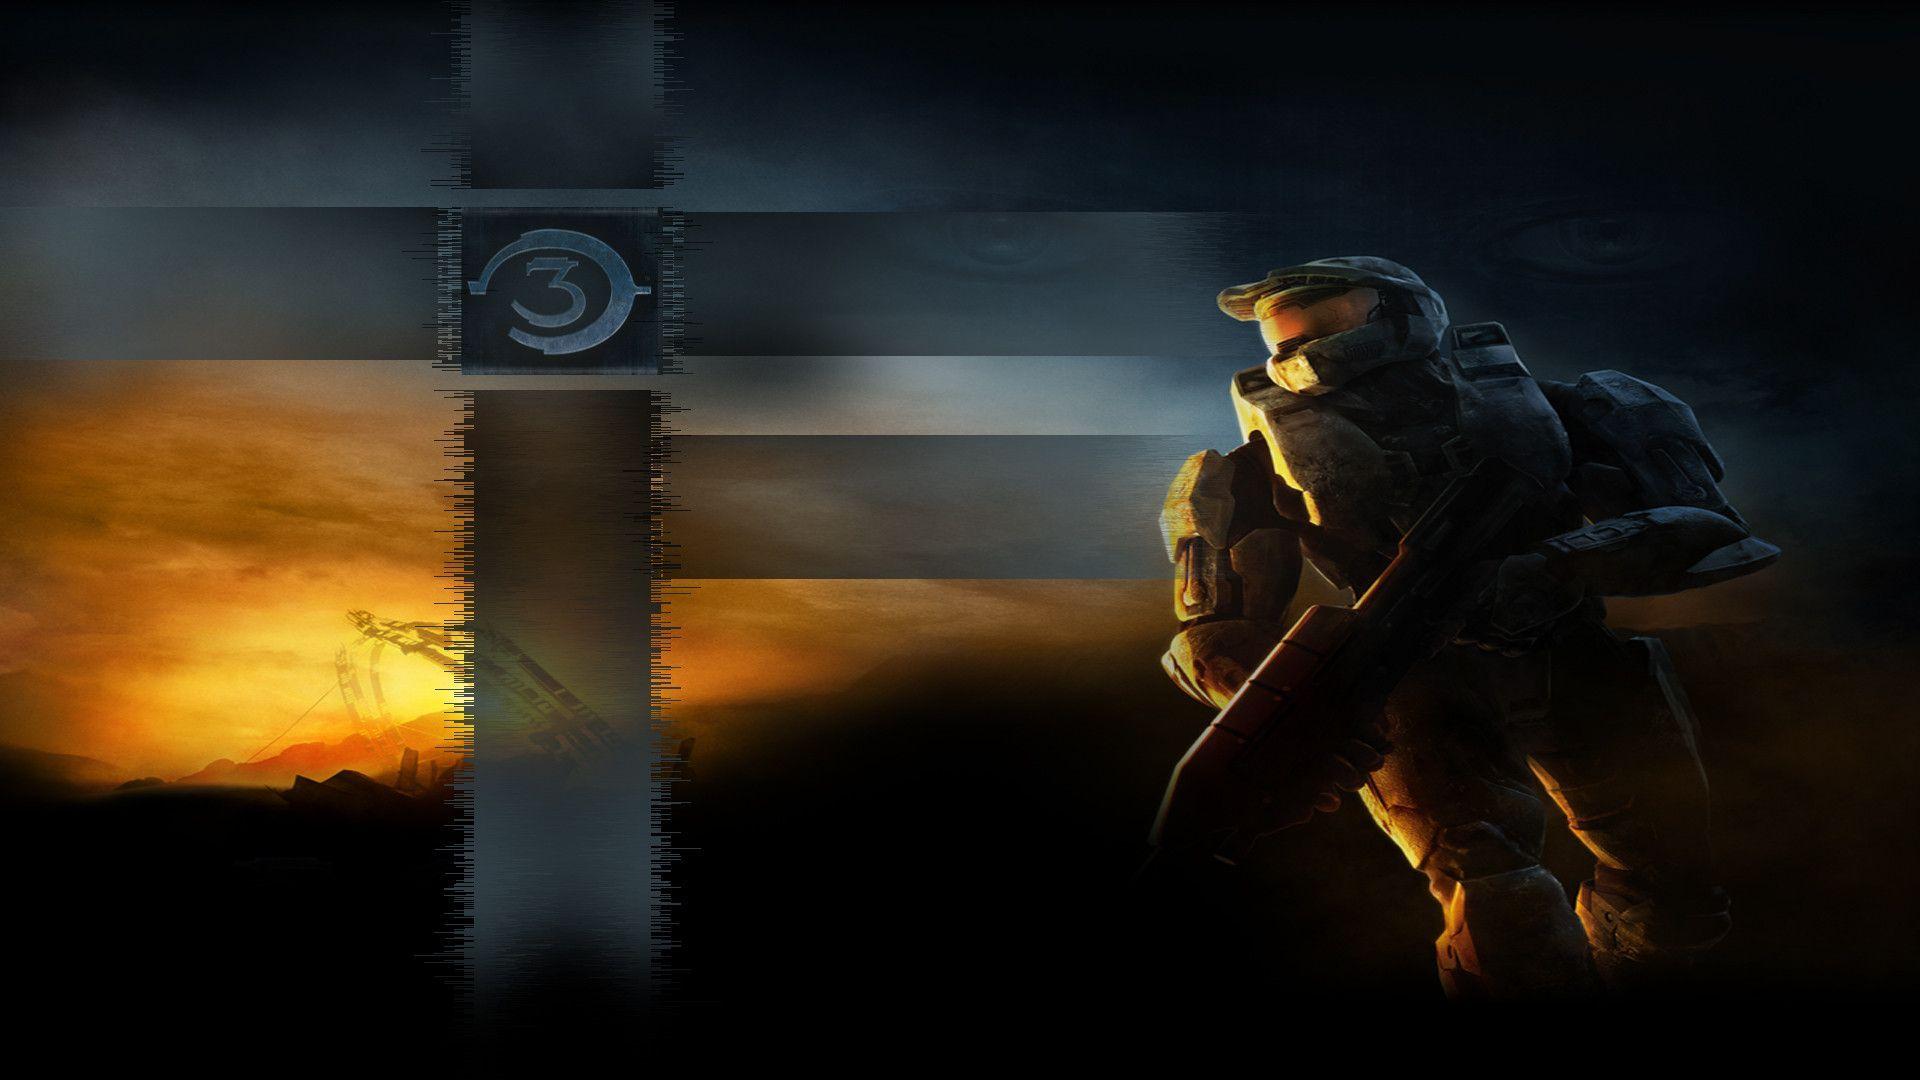 Wallpaper For > Cool Halo 3 Wallpaper HD